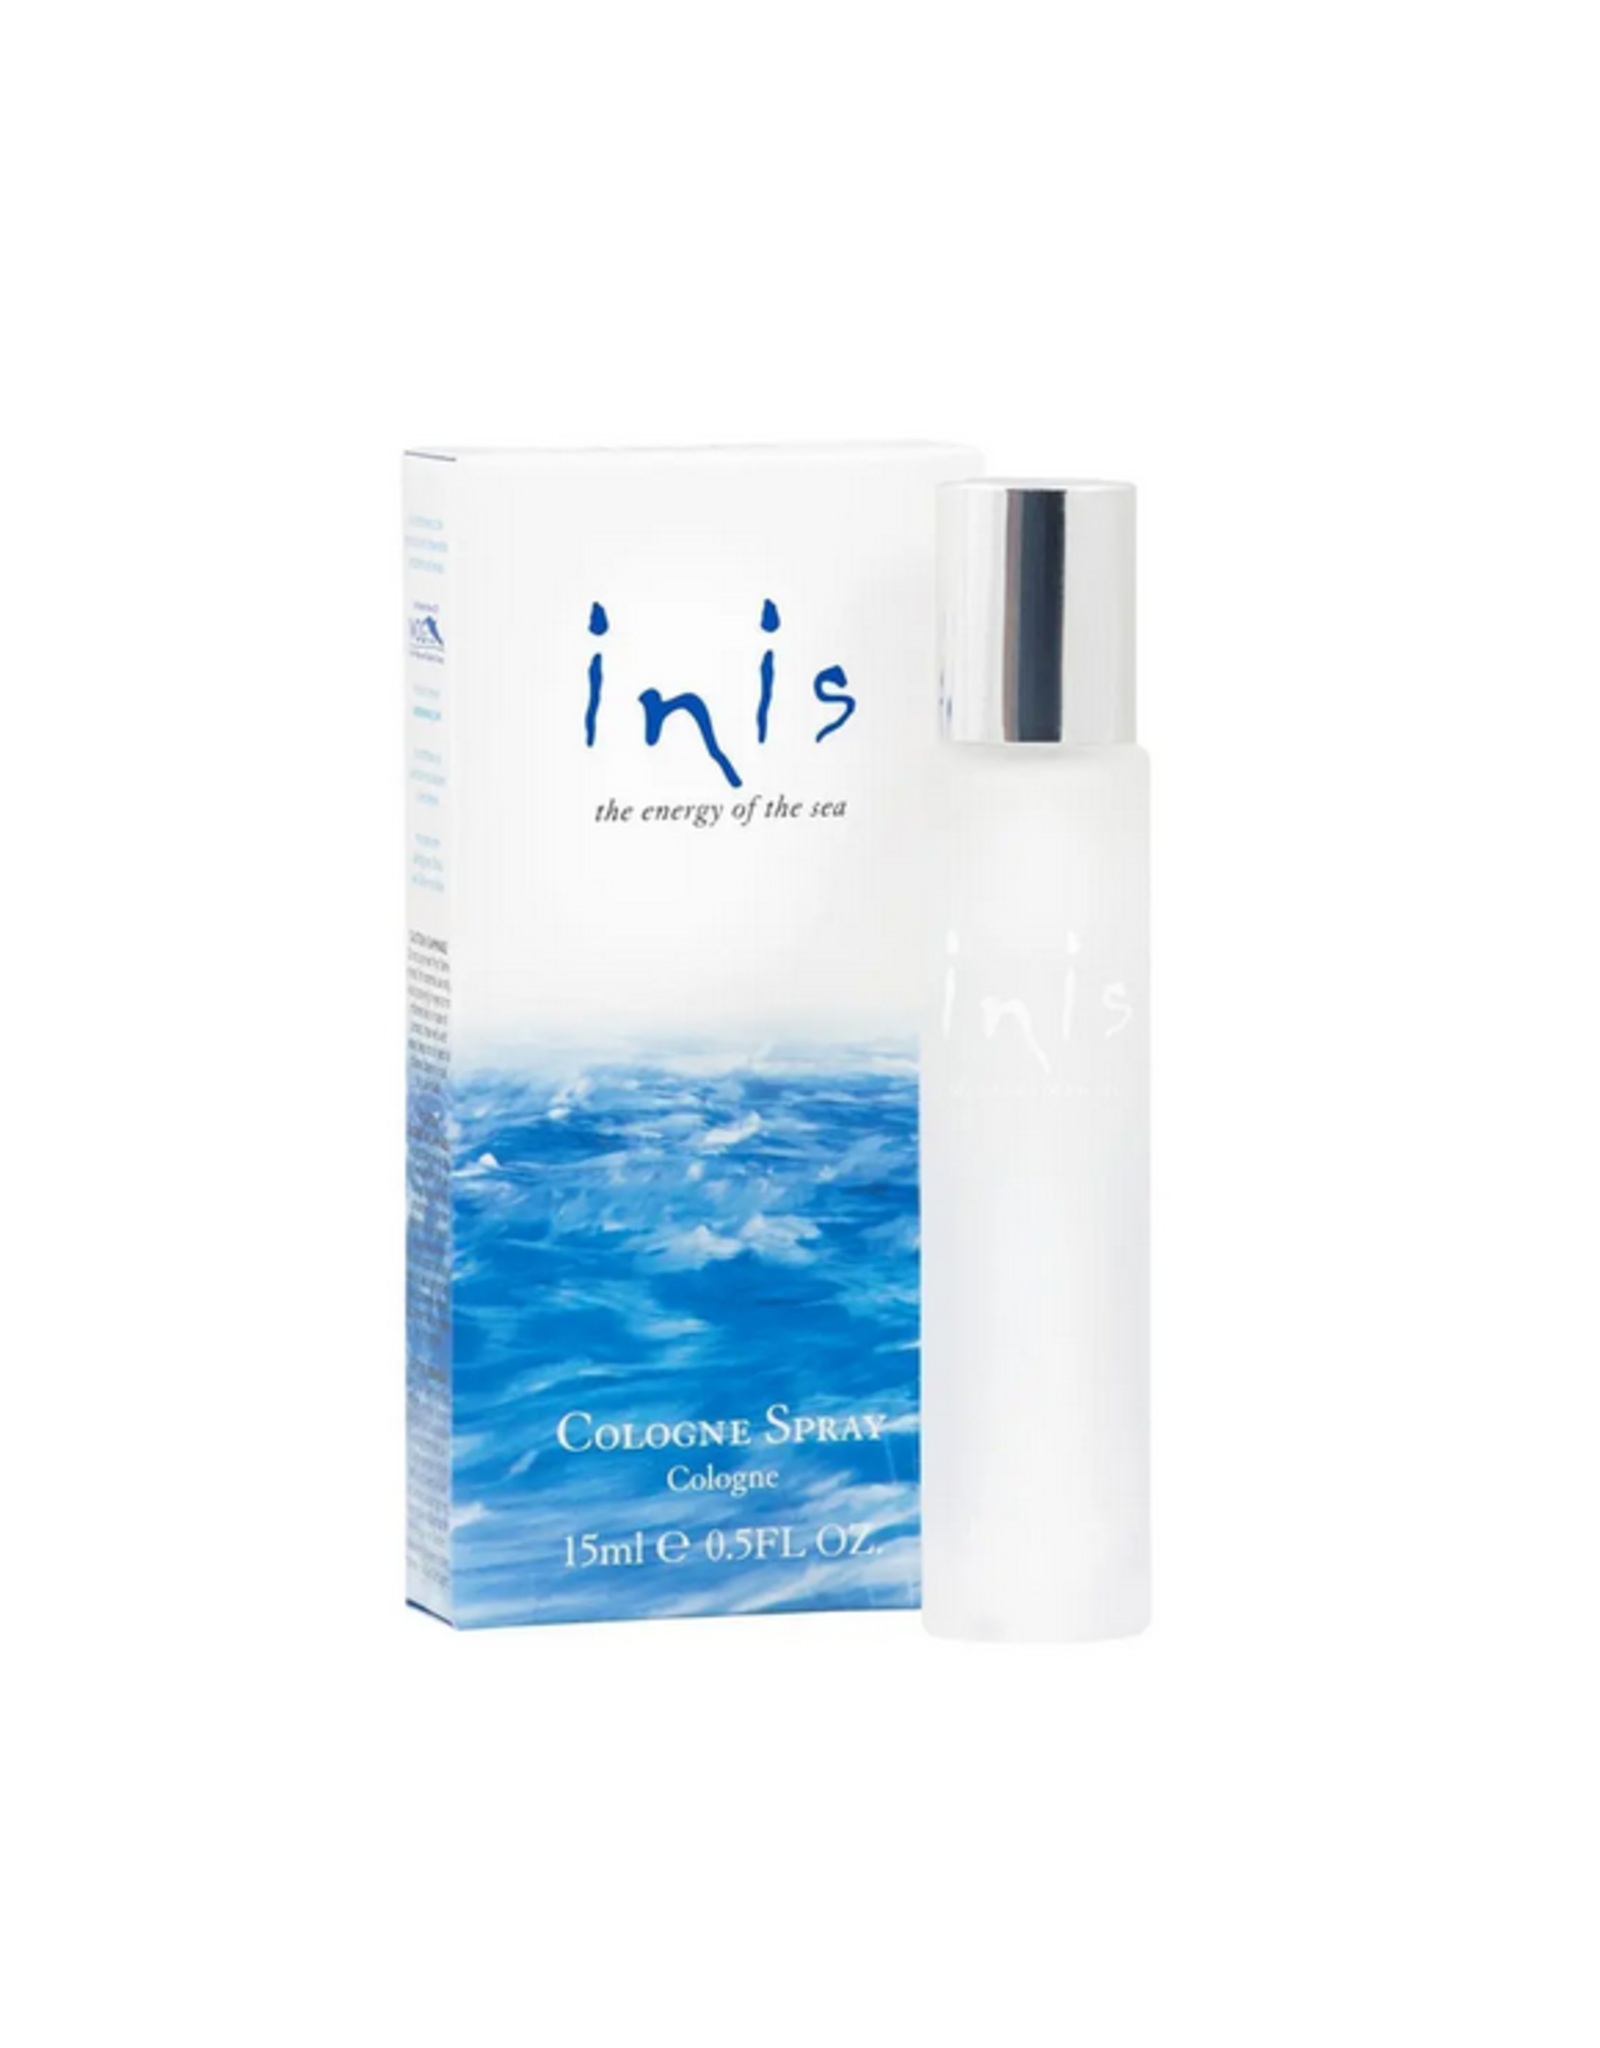 Inis Inis 8012371 EOTS Travel Size Cologne  Spray .5 fl oz